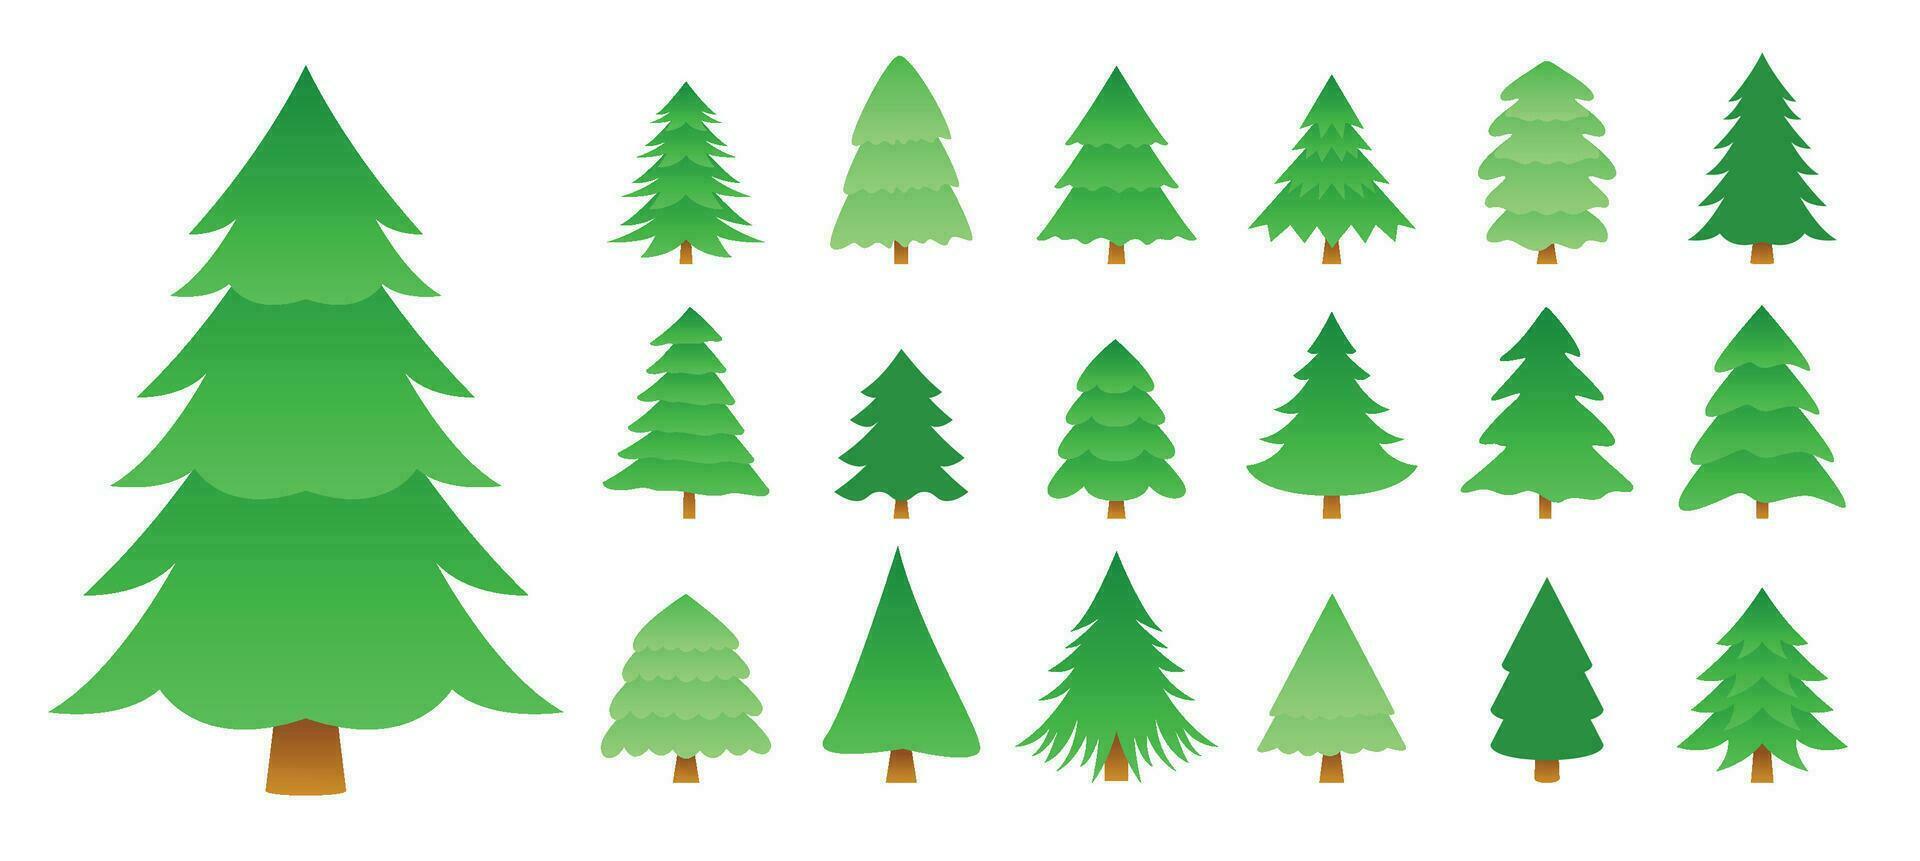 layouts of different christmas trees design in collection vector